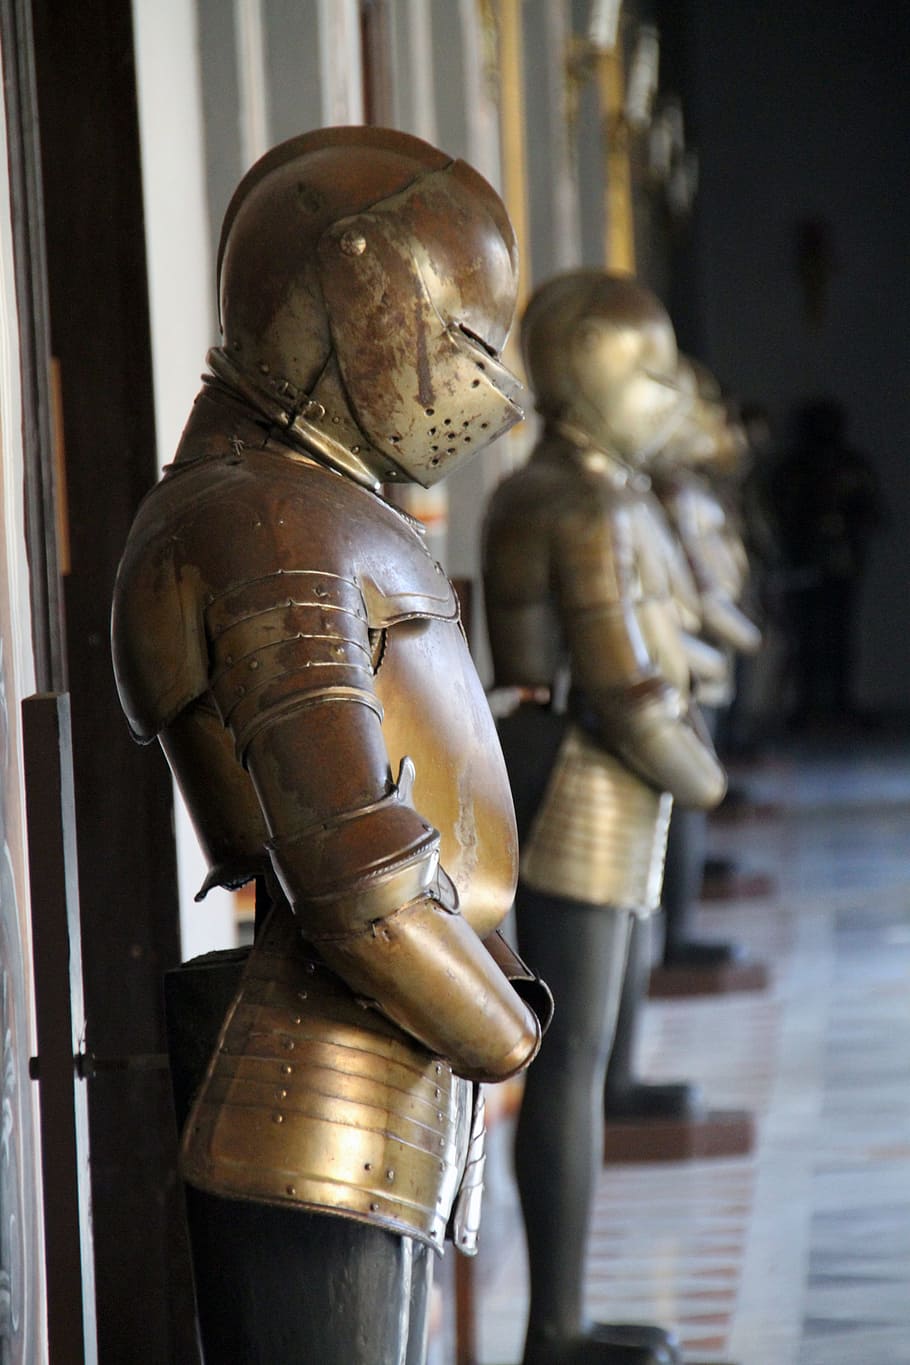 armour, sculpture, weapon, people, statue, ancient, warrior, knight, representation, human representation